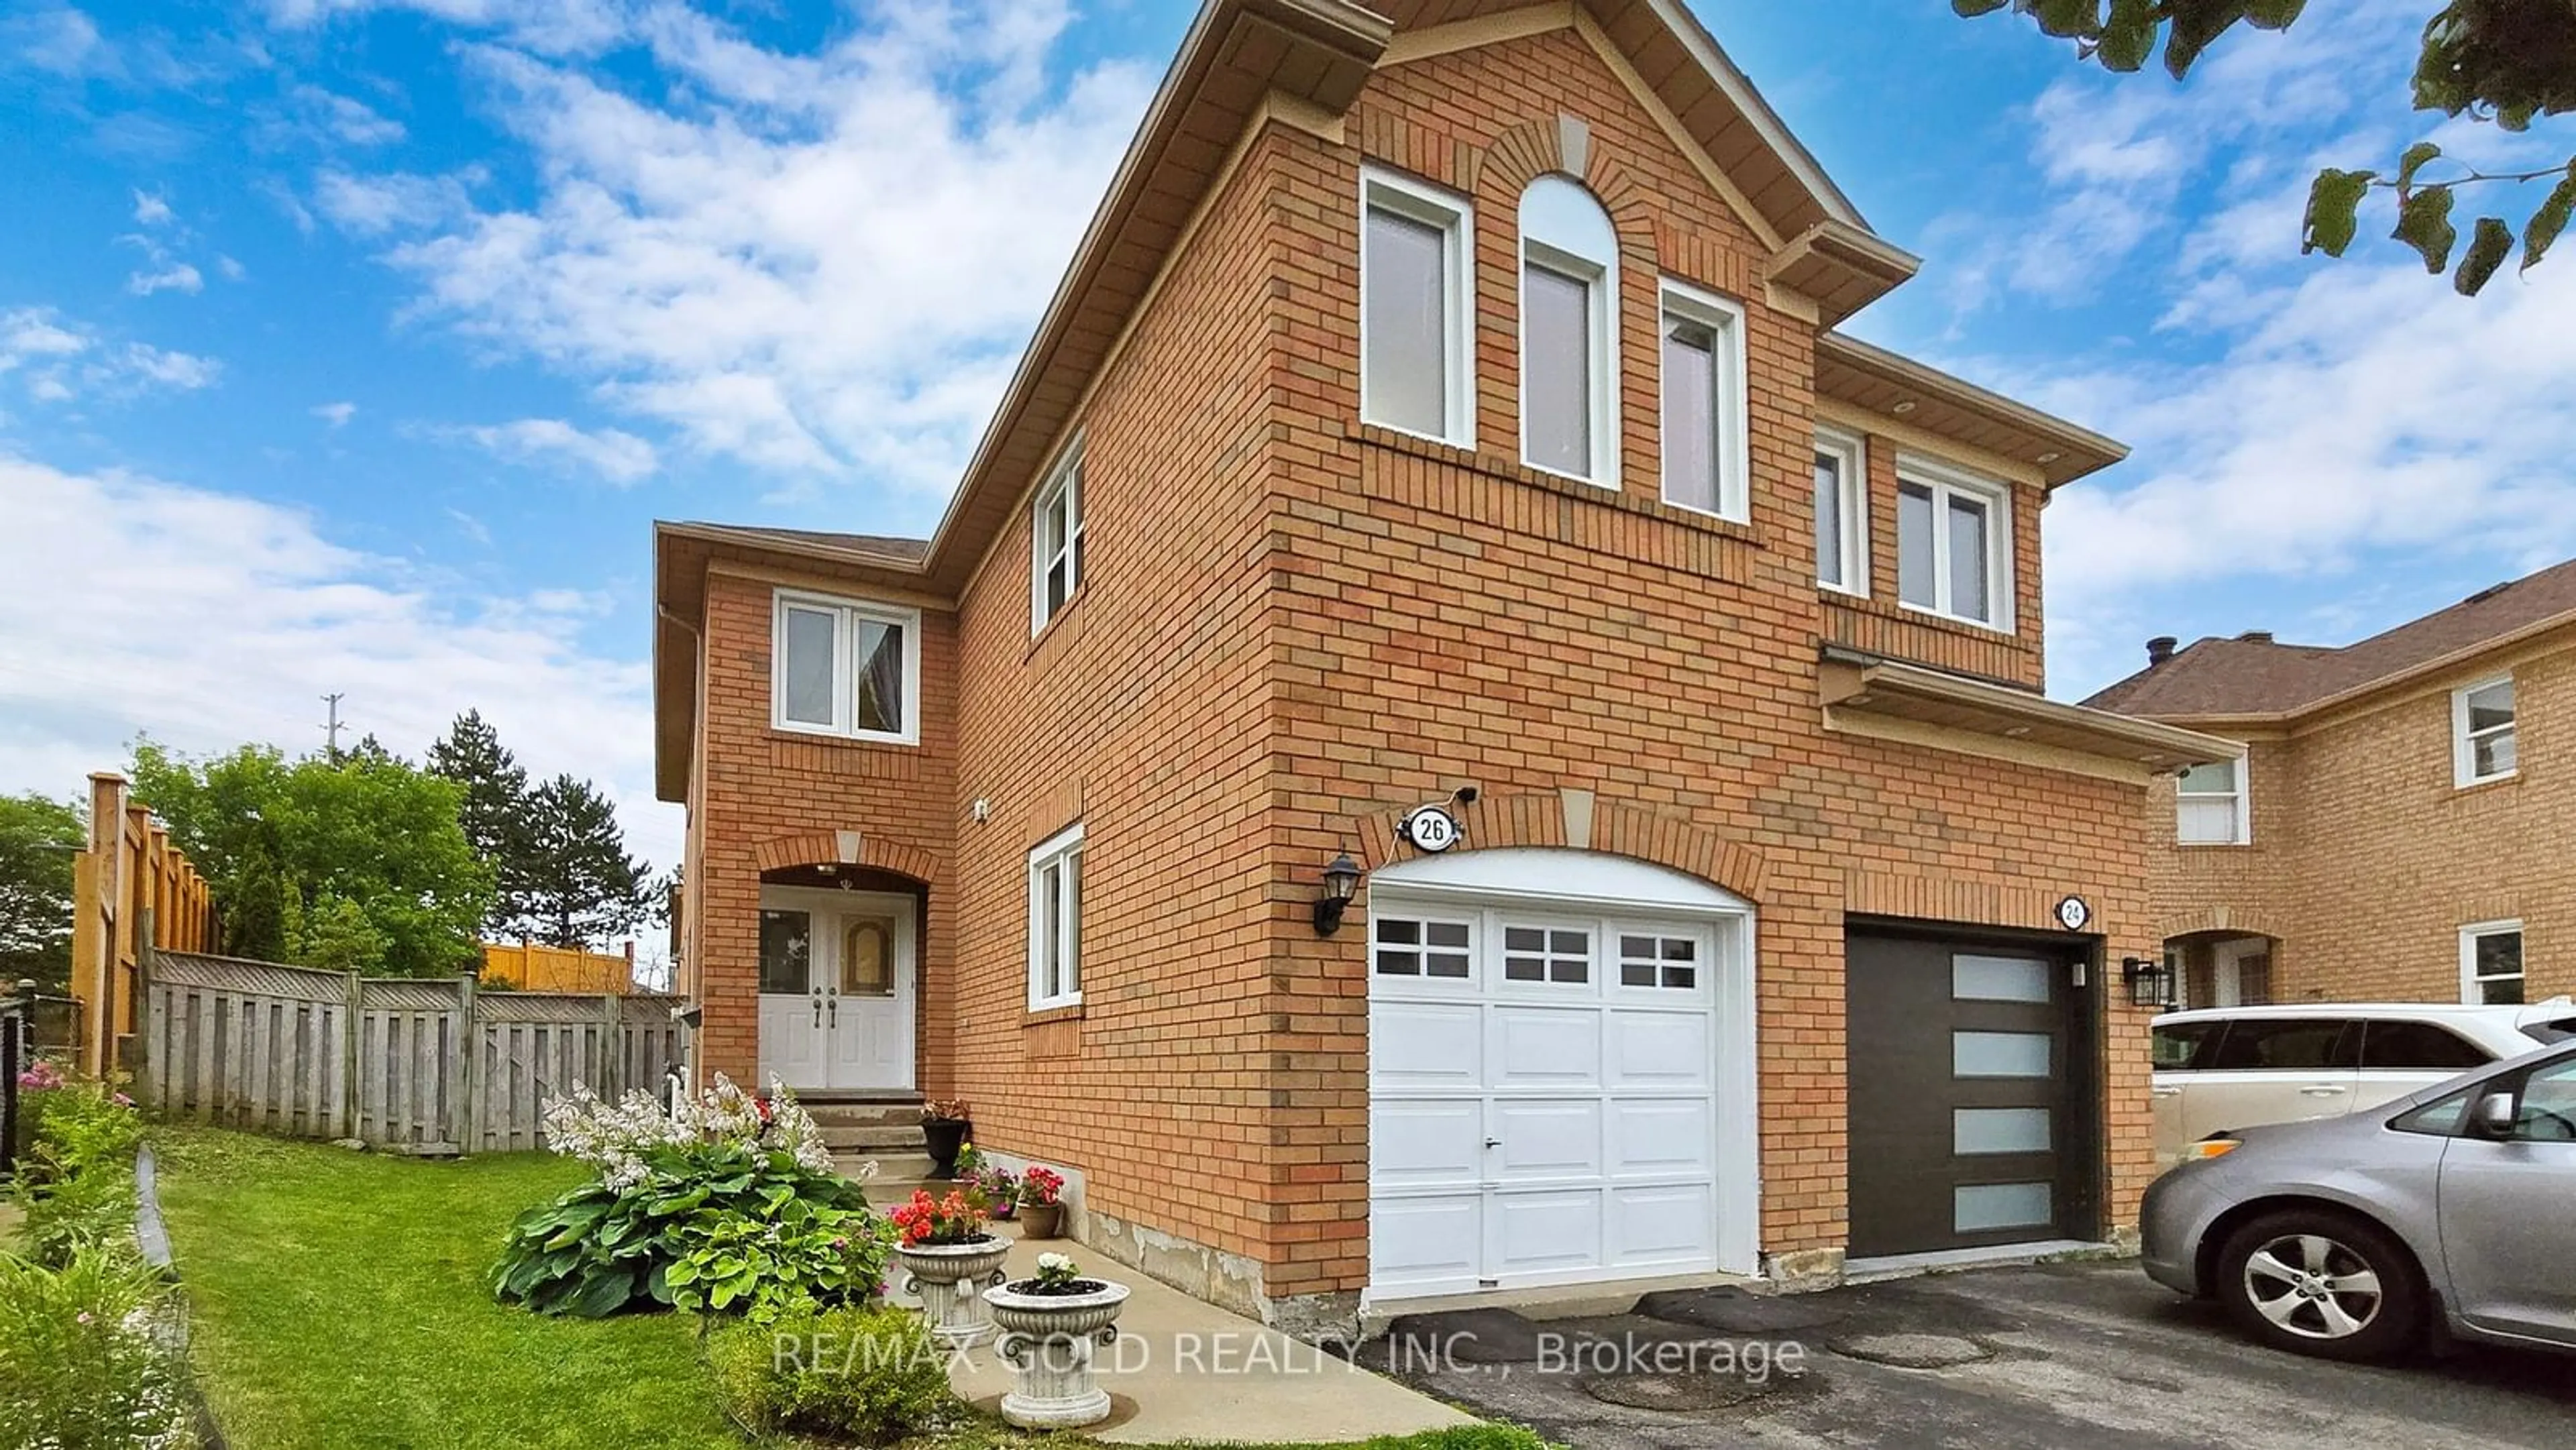 Home with brick exterior material for 26 Mount Ranier Cres, Brampton Ontario L6R 2K9